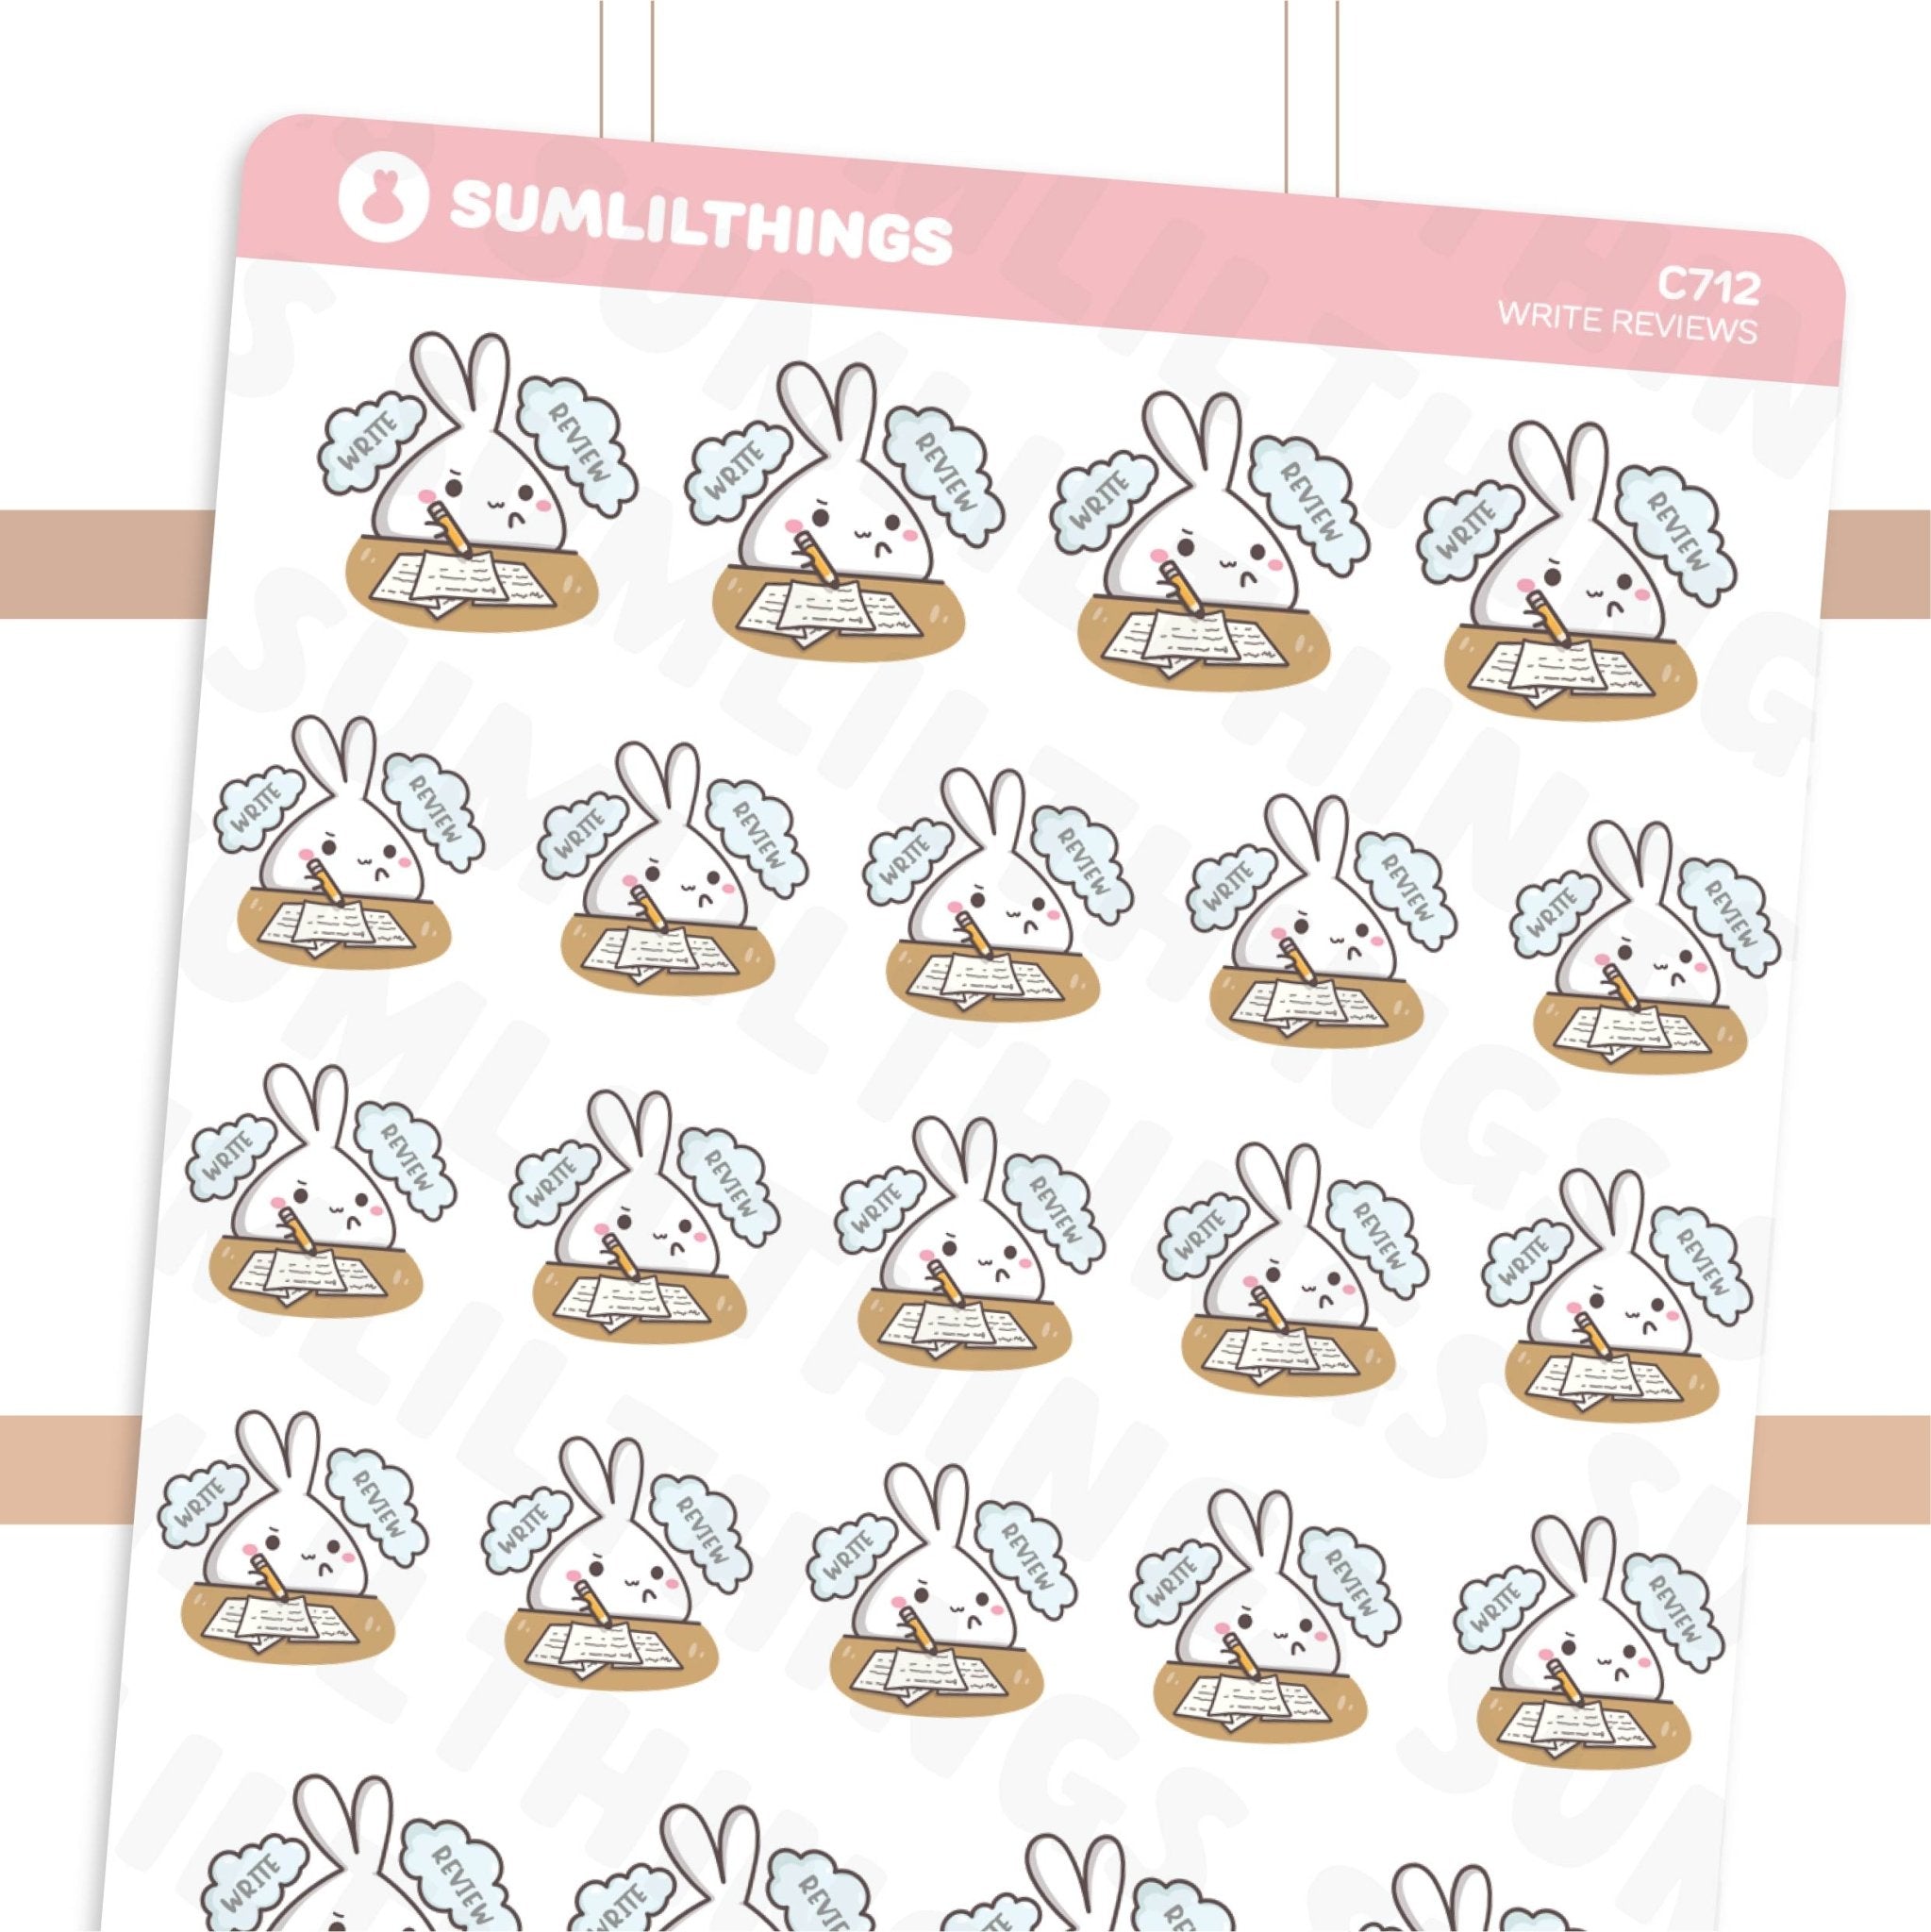 Write Lil' Review Stickers - SumLilThings